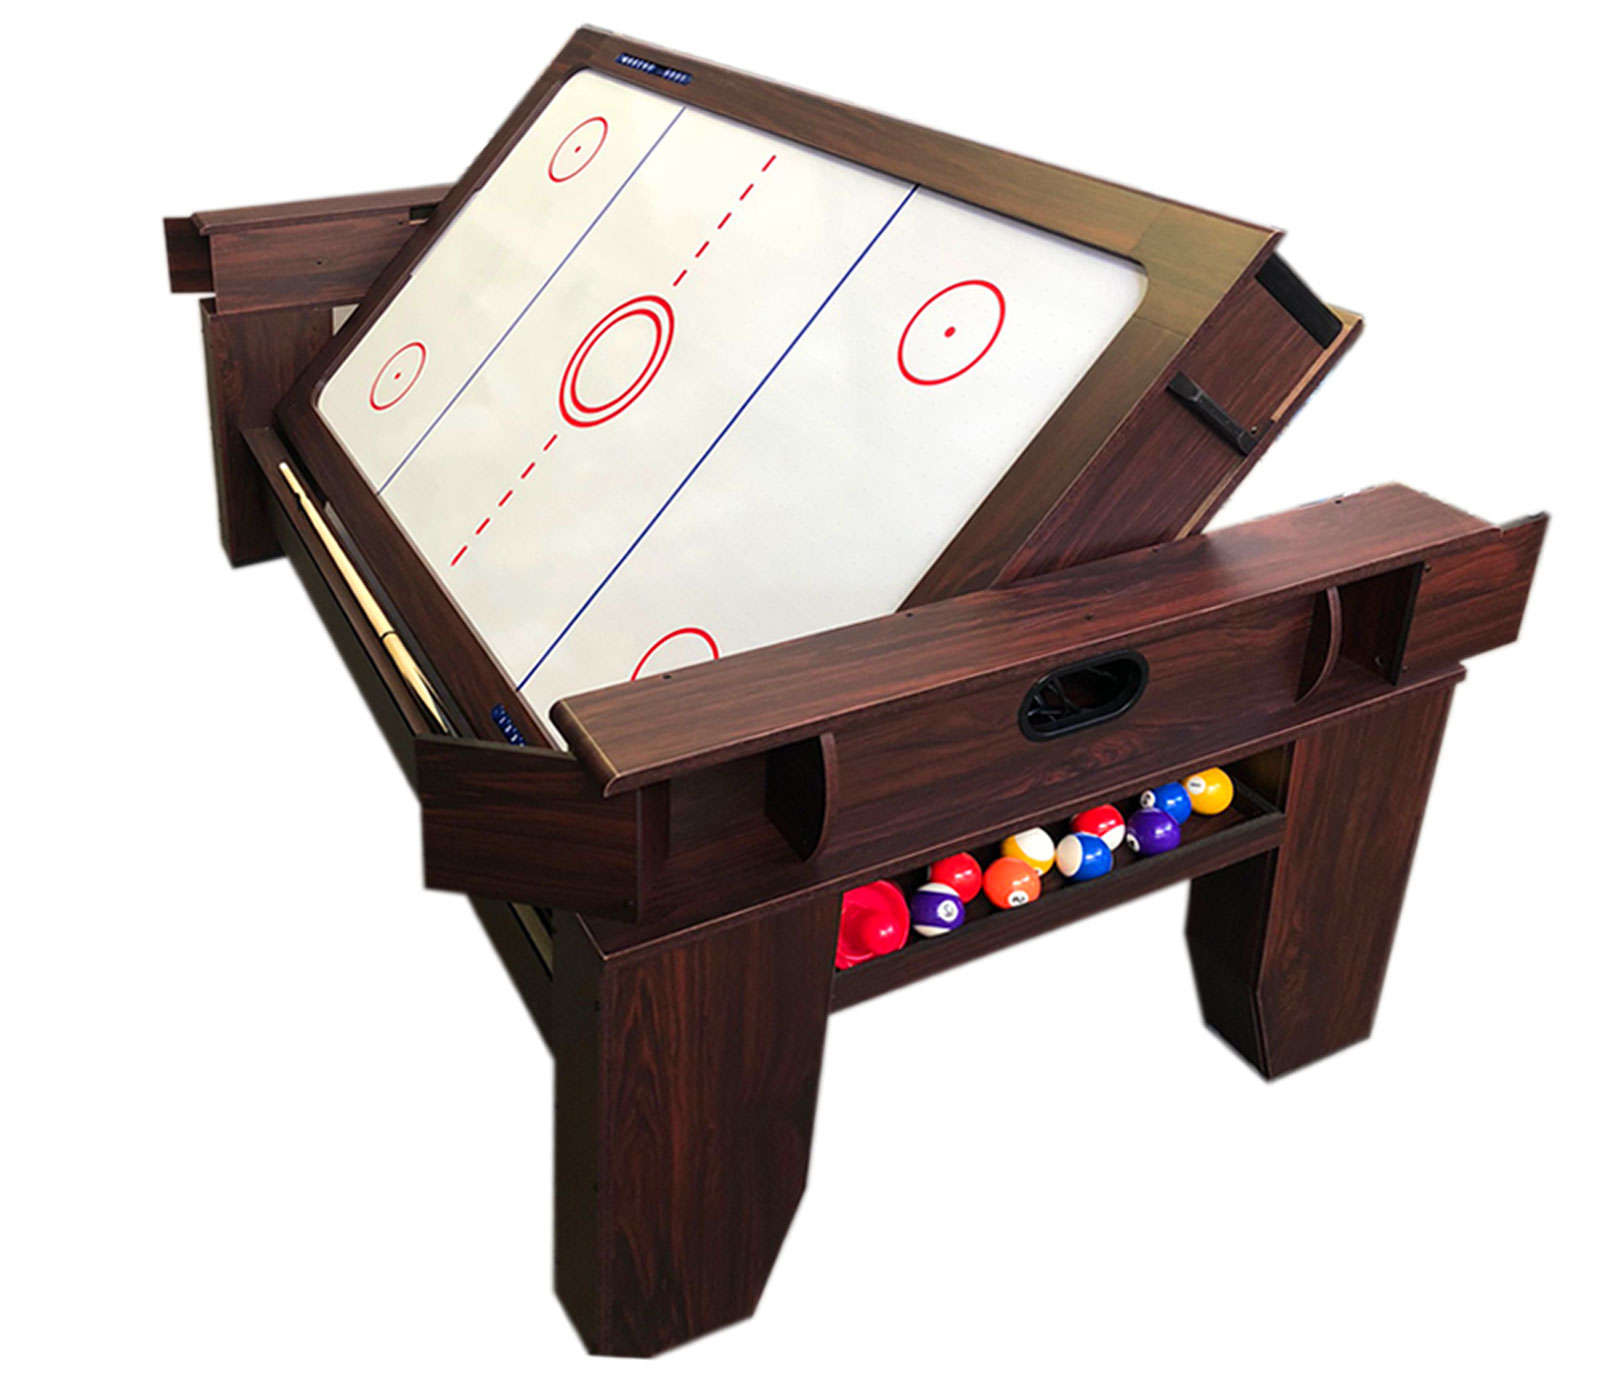 Level Up Your Typical Air Hockey Table With Air Hockey Pool Table Combo